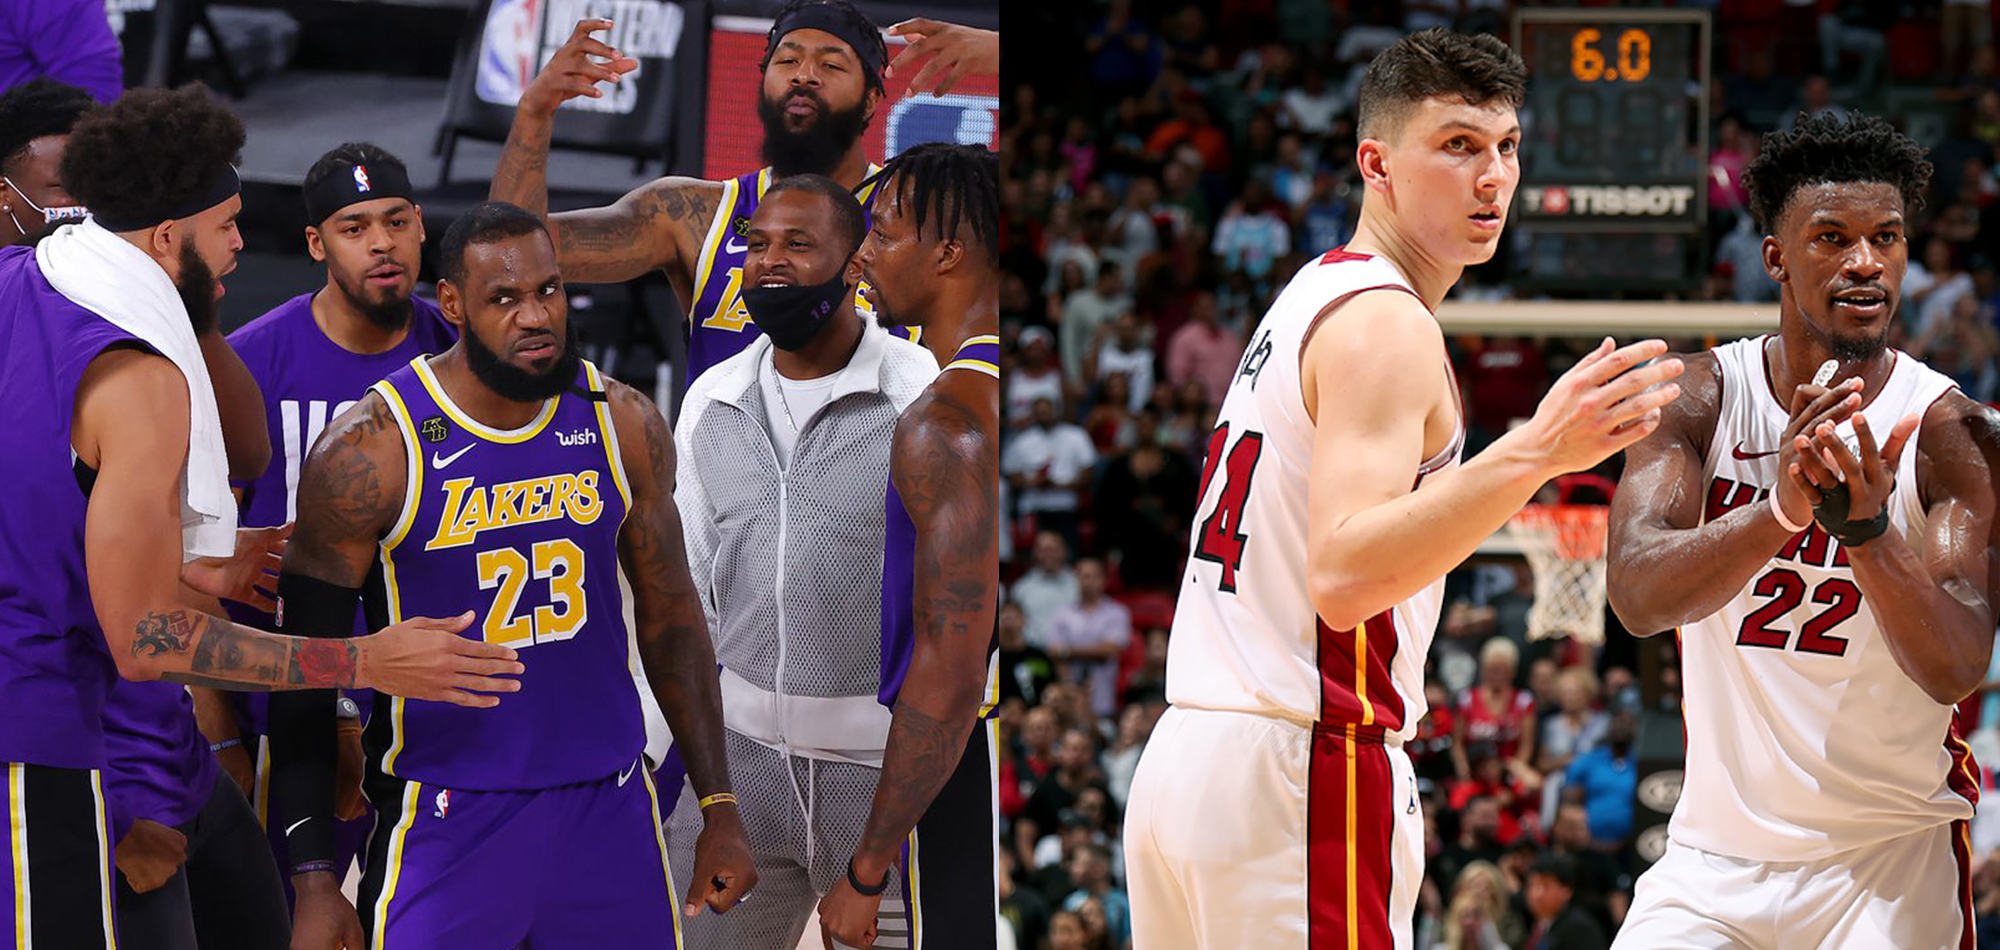 The Los Angeles Lakers are set to face the Miami Heat tonight in game 1 of the NBA Finals. 